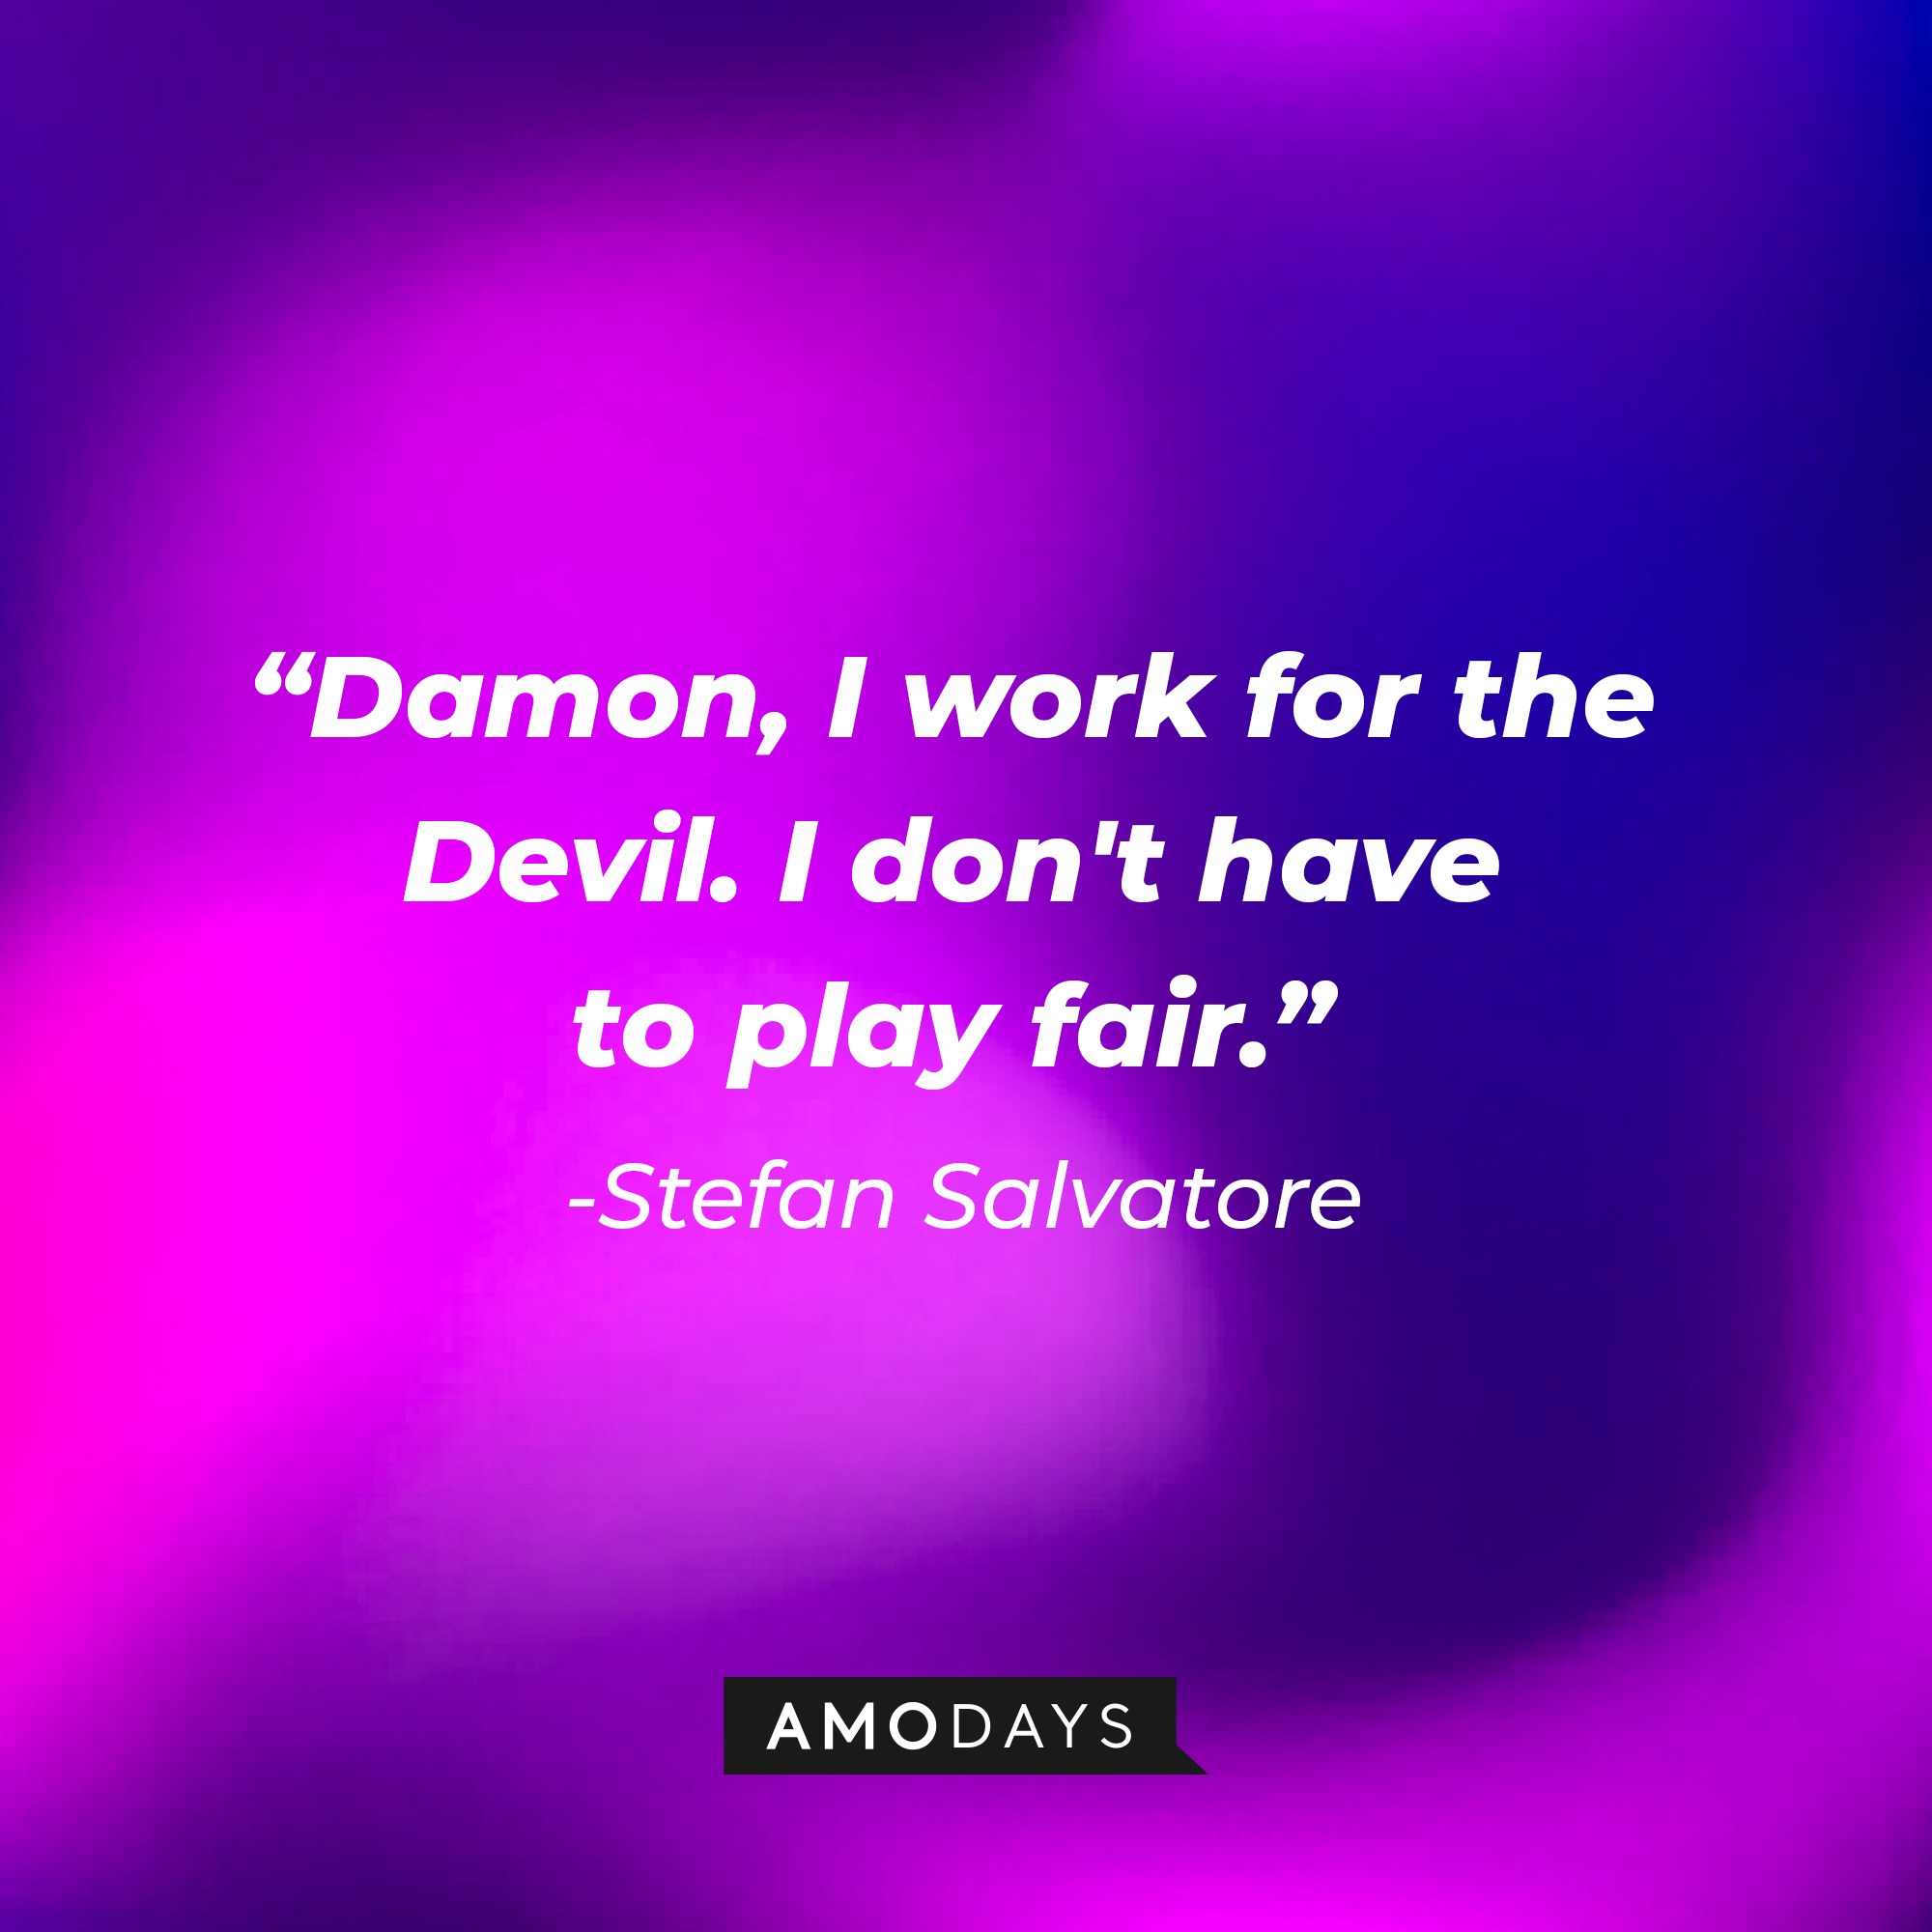 Stefan Salvatore's quote: "Damon, I work for the Devil. I don't have to play fair." | Source: AmoDays